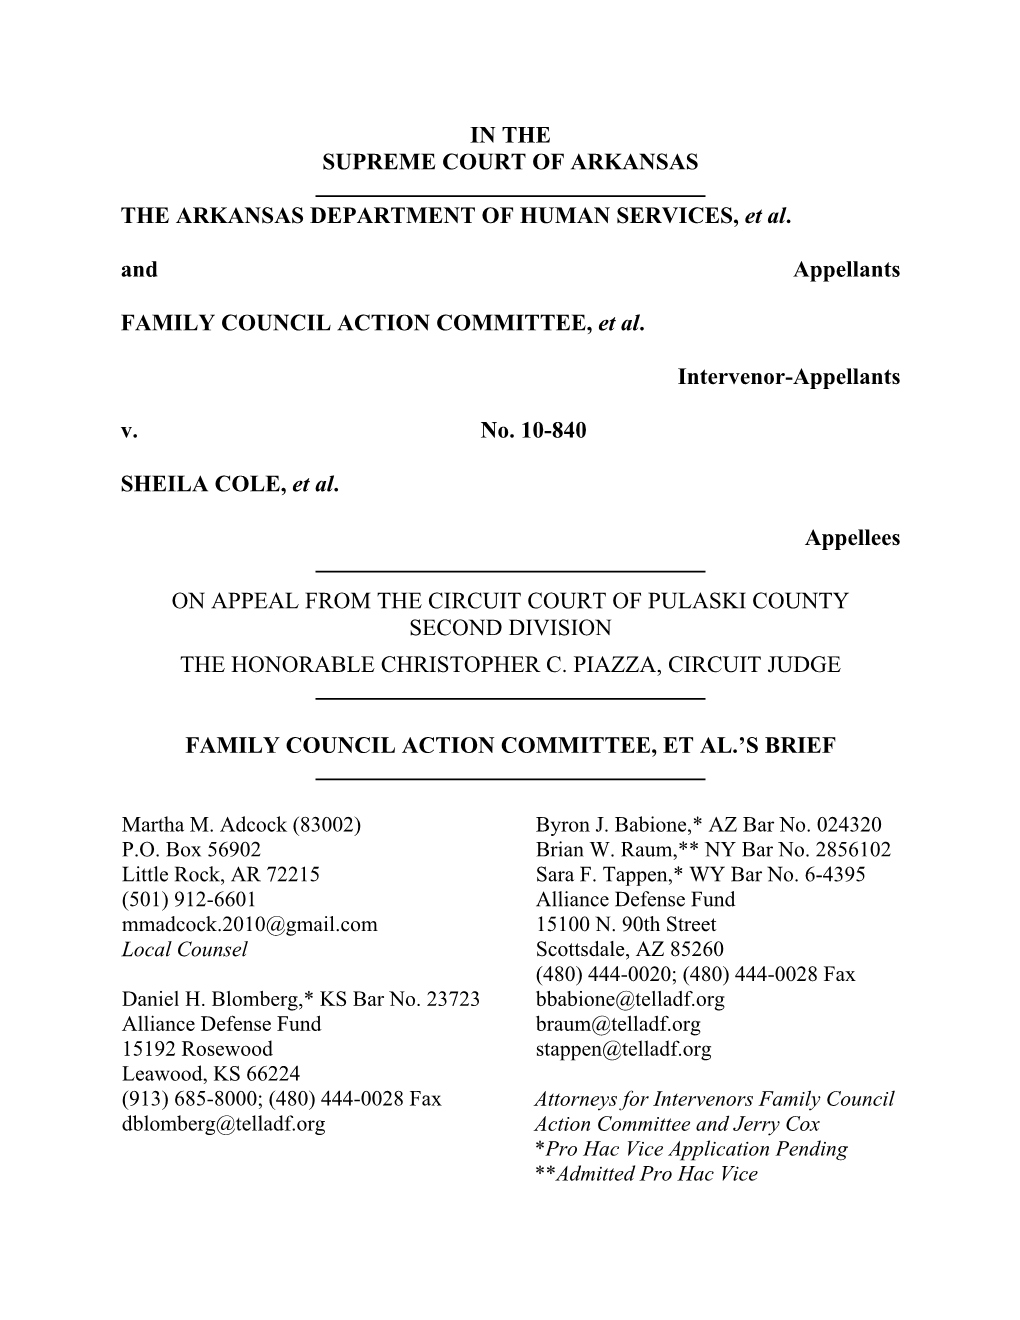 Brief Filed with Arkansas Supreme Court